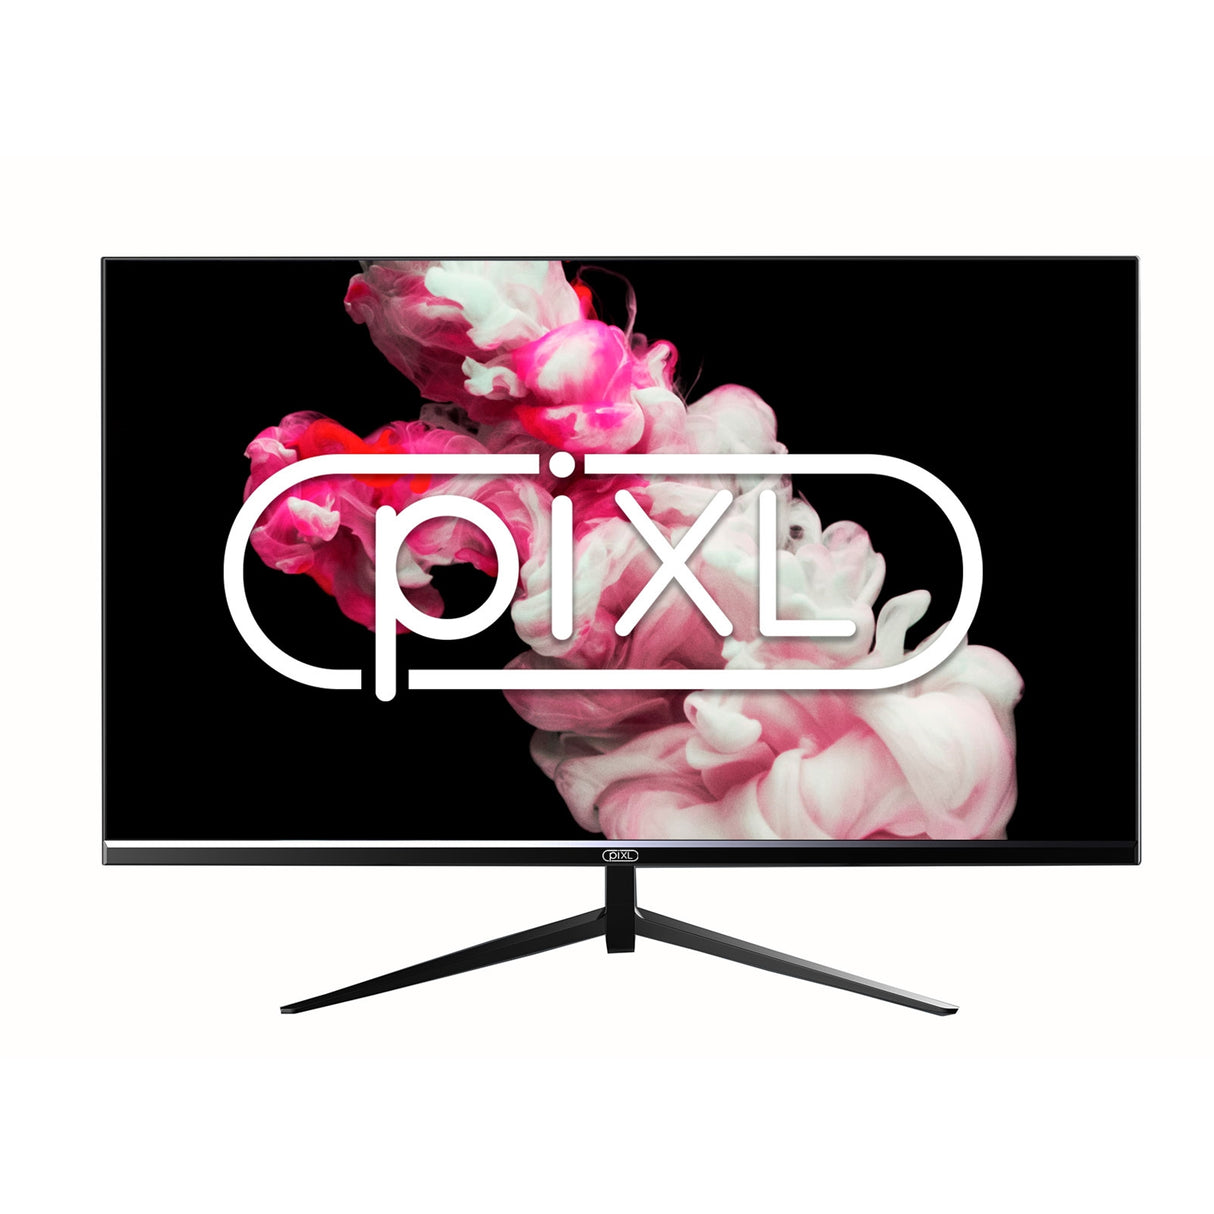 piXL PX27IVH 27 Inch Frameless Monitor, Widescreen IPS LED Panel, True -to-Life Colours, Full HD 1920x1080, 5ms Response Time, 75Hz Refresh, HDMI, VGA, Black Finish